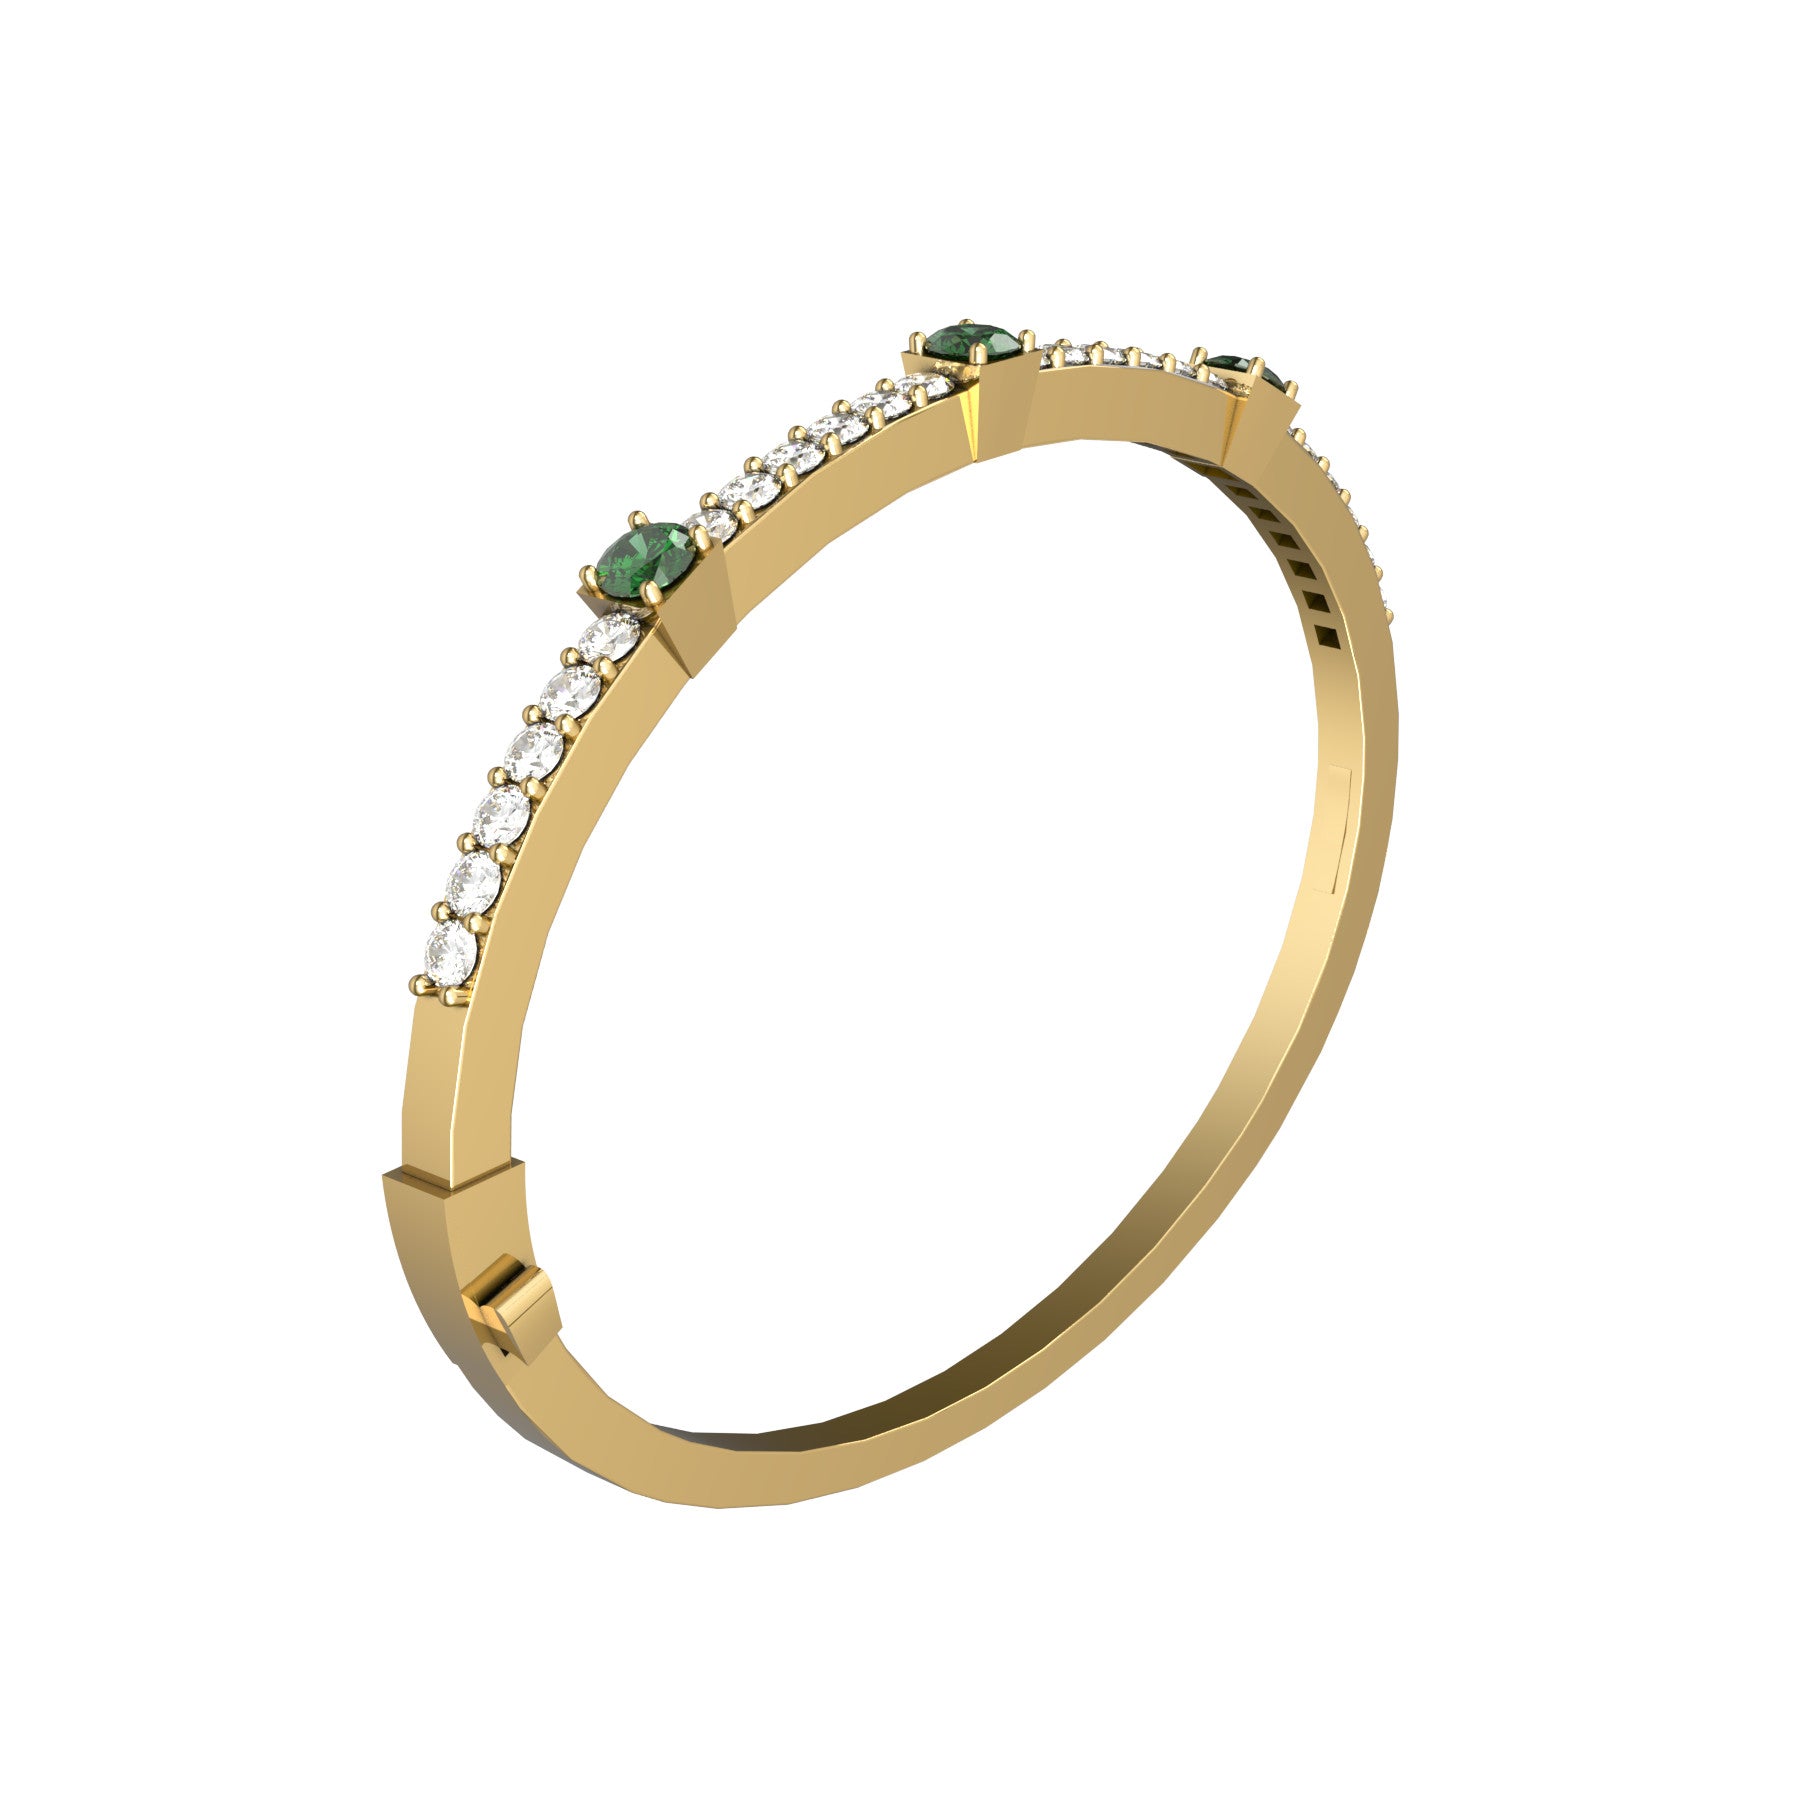 vesper rigid bracelet, natural round emeralds, natural round diamonds, 18 K yellow gold, weight  about 15,0 to 32,4 g (0.53 to 1.14 oz); width 4,0 mm max